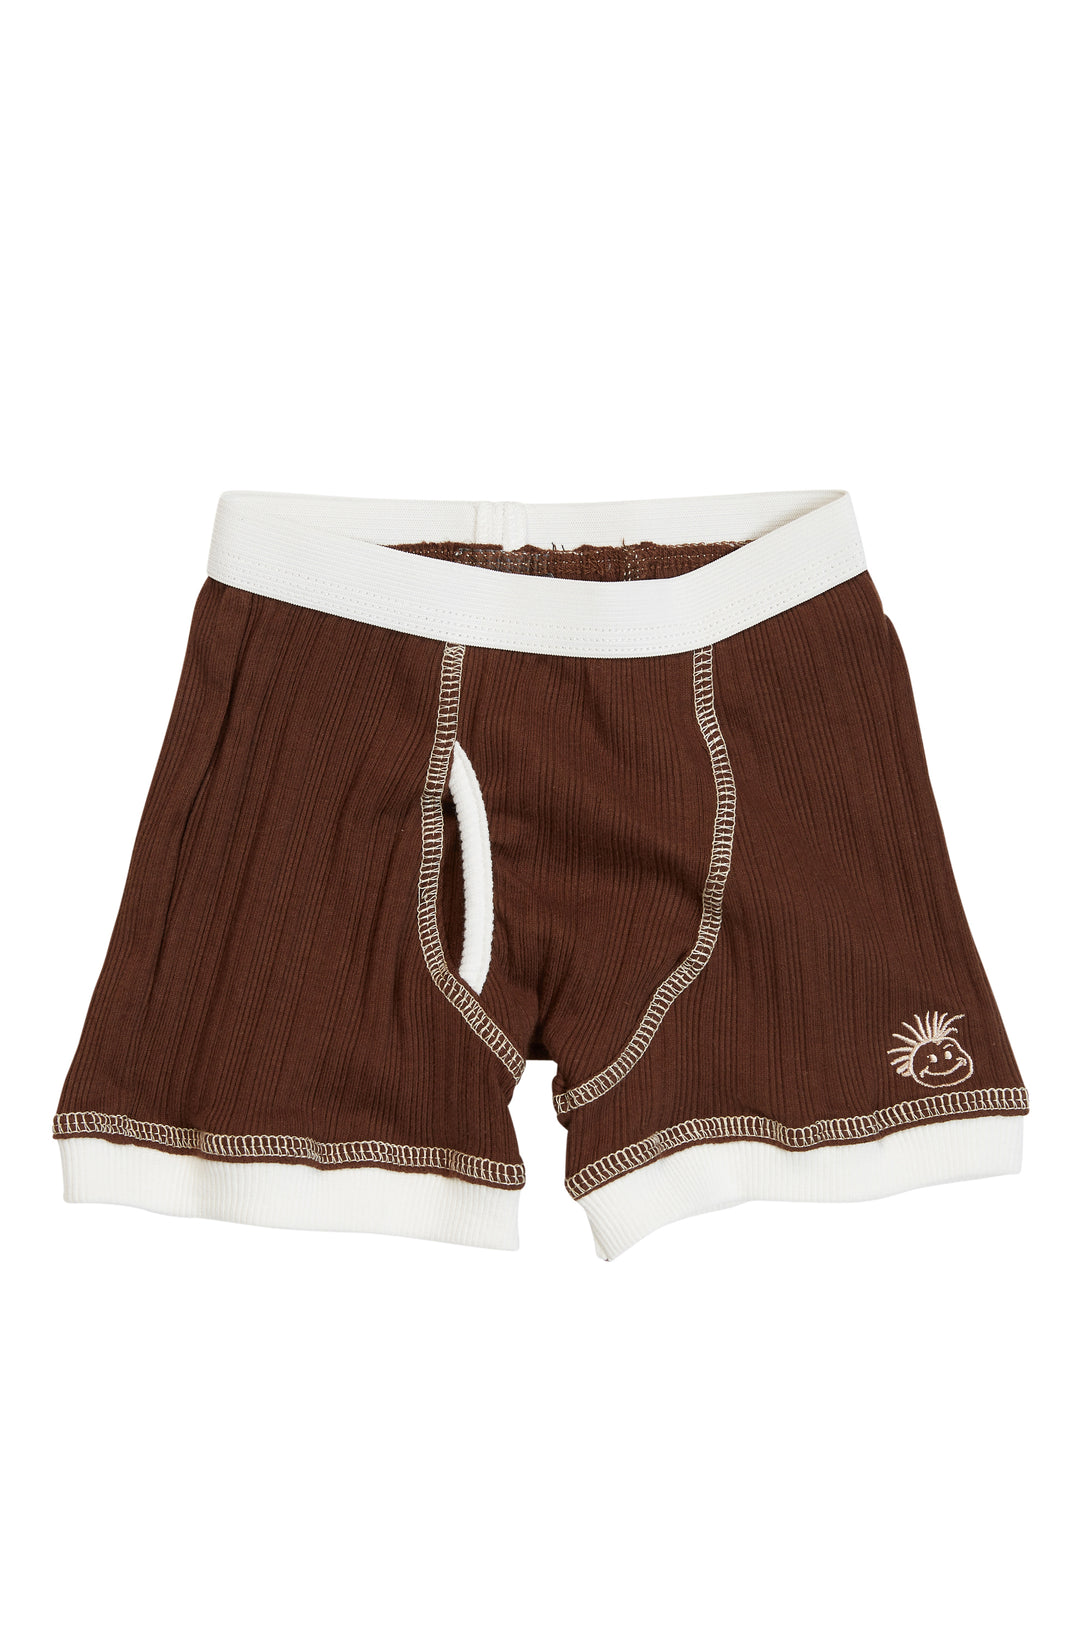 An image of Knuckleheads Logo Brown Skivvies for Kids, showcasing stylish black underwear with the iconic Knuckleheads logo. These comfortable and trendy undergarments are perfect for children, combining fashion and comfort seamlessly.